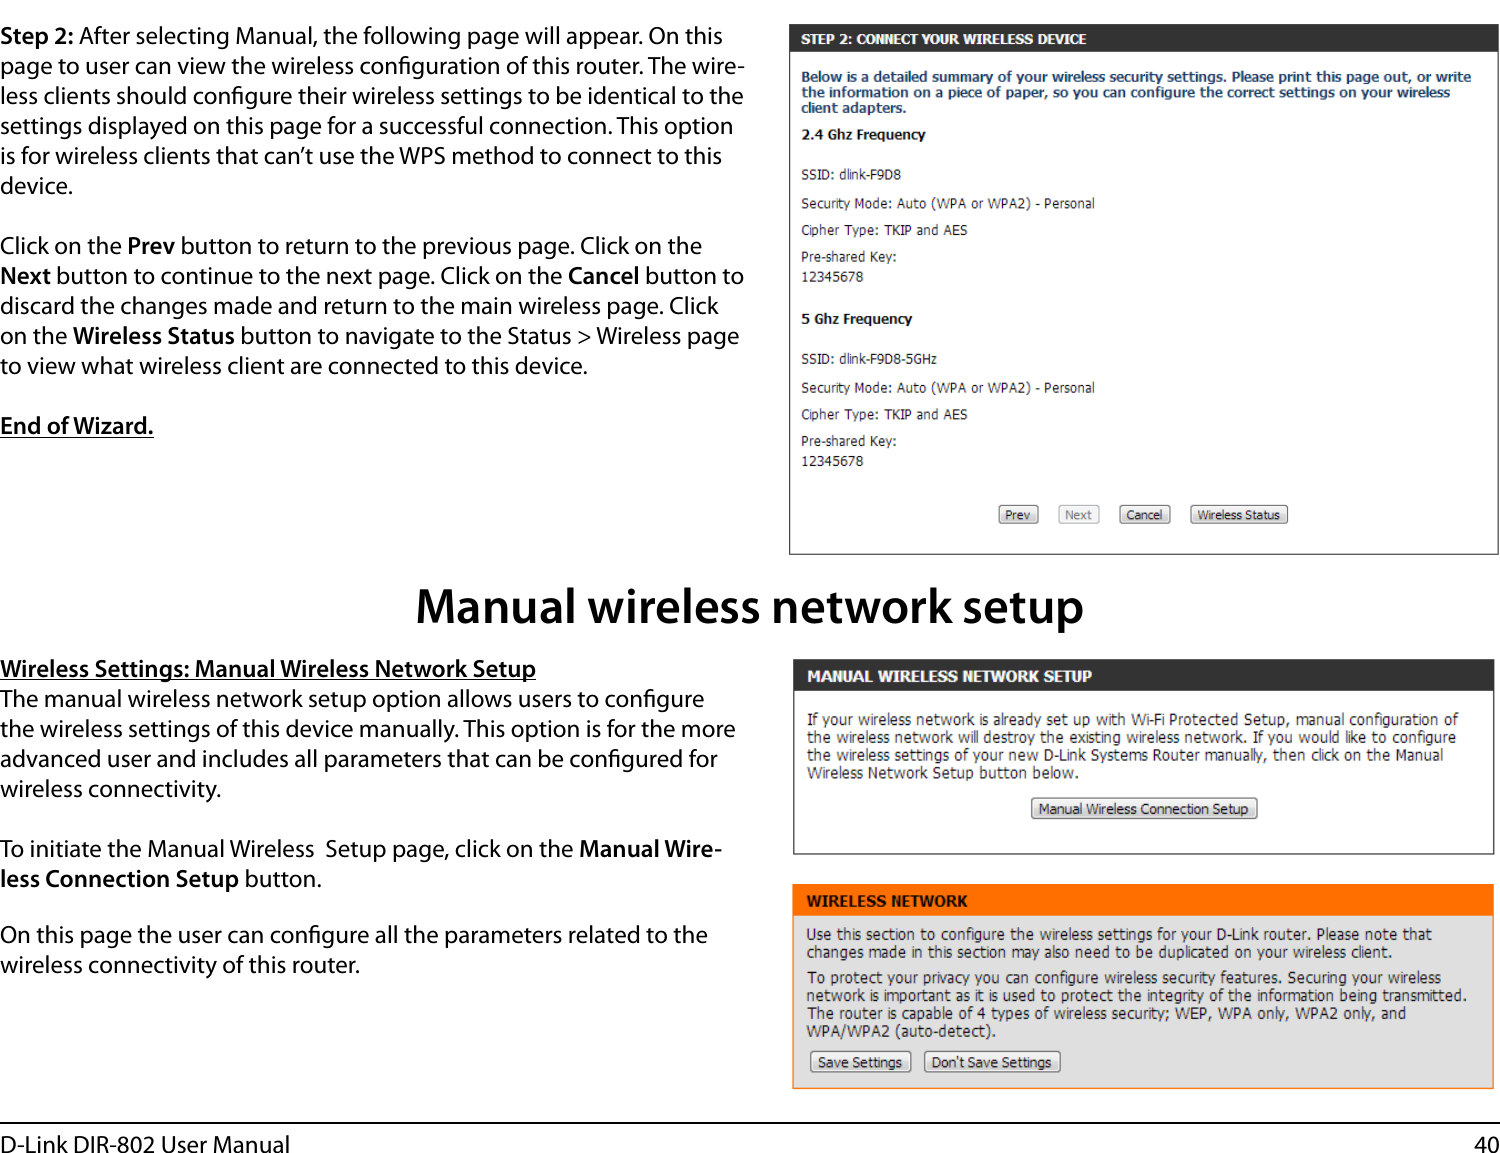 40D-Link DIR-802 User ManualStep 2: After selecting Manual, the following page will appear. On this page to user can view the wireless conguration of this router. The wire-less clients should congure their wireless settings to be identical to the settings displayed on this page for a successful connection. This option is for wireless clients that can’t use the WPS method to connect to this device.Click on the Prev button to return to the previous page. Click on the Next button to continue to the next page. Click on the Cancel button to discard the changes made and return to the main wireless page. Click on the Wireless Status button to navigate to the Status &gt; Wireless page to view what wireless client are connected to this device.End of Wizard.Wireless Settings: Manual Wireless Network SetupThe manual wireless network setup option allows users to congure the wireless settings of this device manually. This option is for the more advanced user and includes all parameters that can be congured for wireless connectivity.To initiate the Manual Wireless  Setup page, click on the Manual Wire-less Connection Setup button.On this page the user can congure all the parameters related to the wireless connectivity of this router.Manual wireless network setup